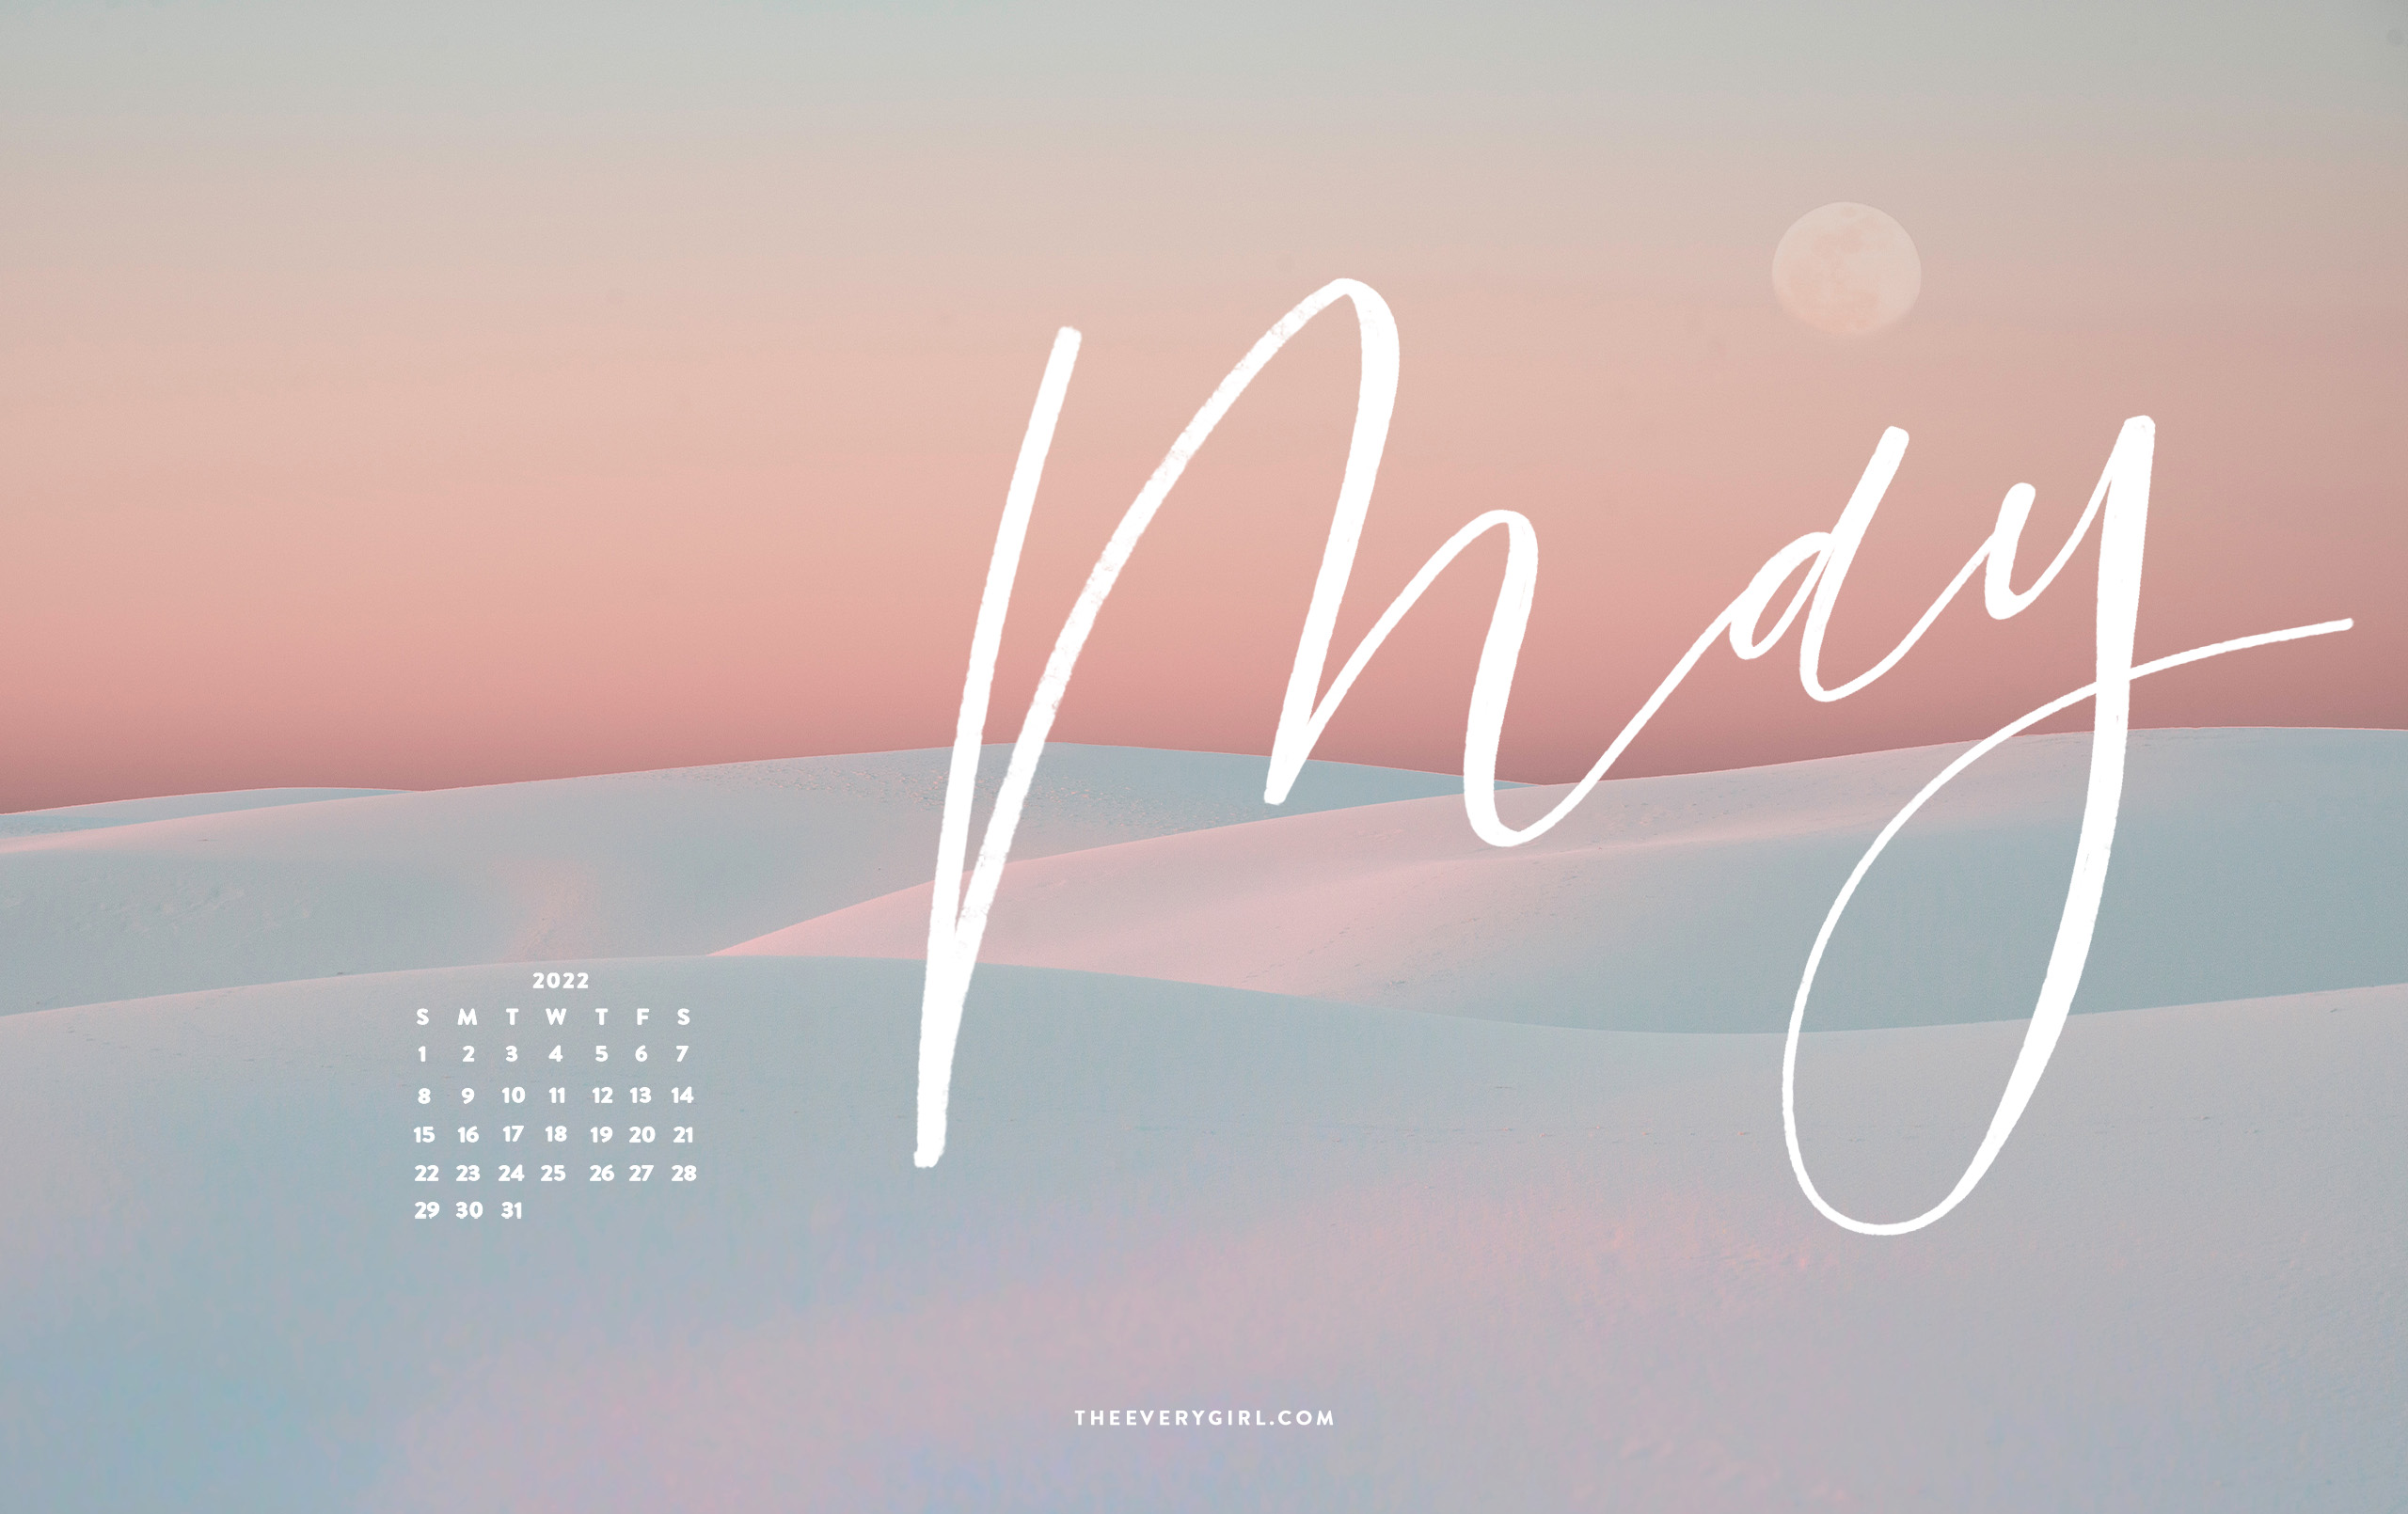 Free downloadable tech backgrounds for may